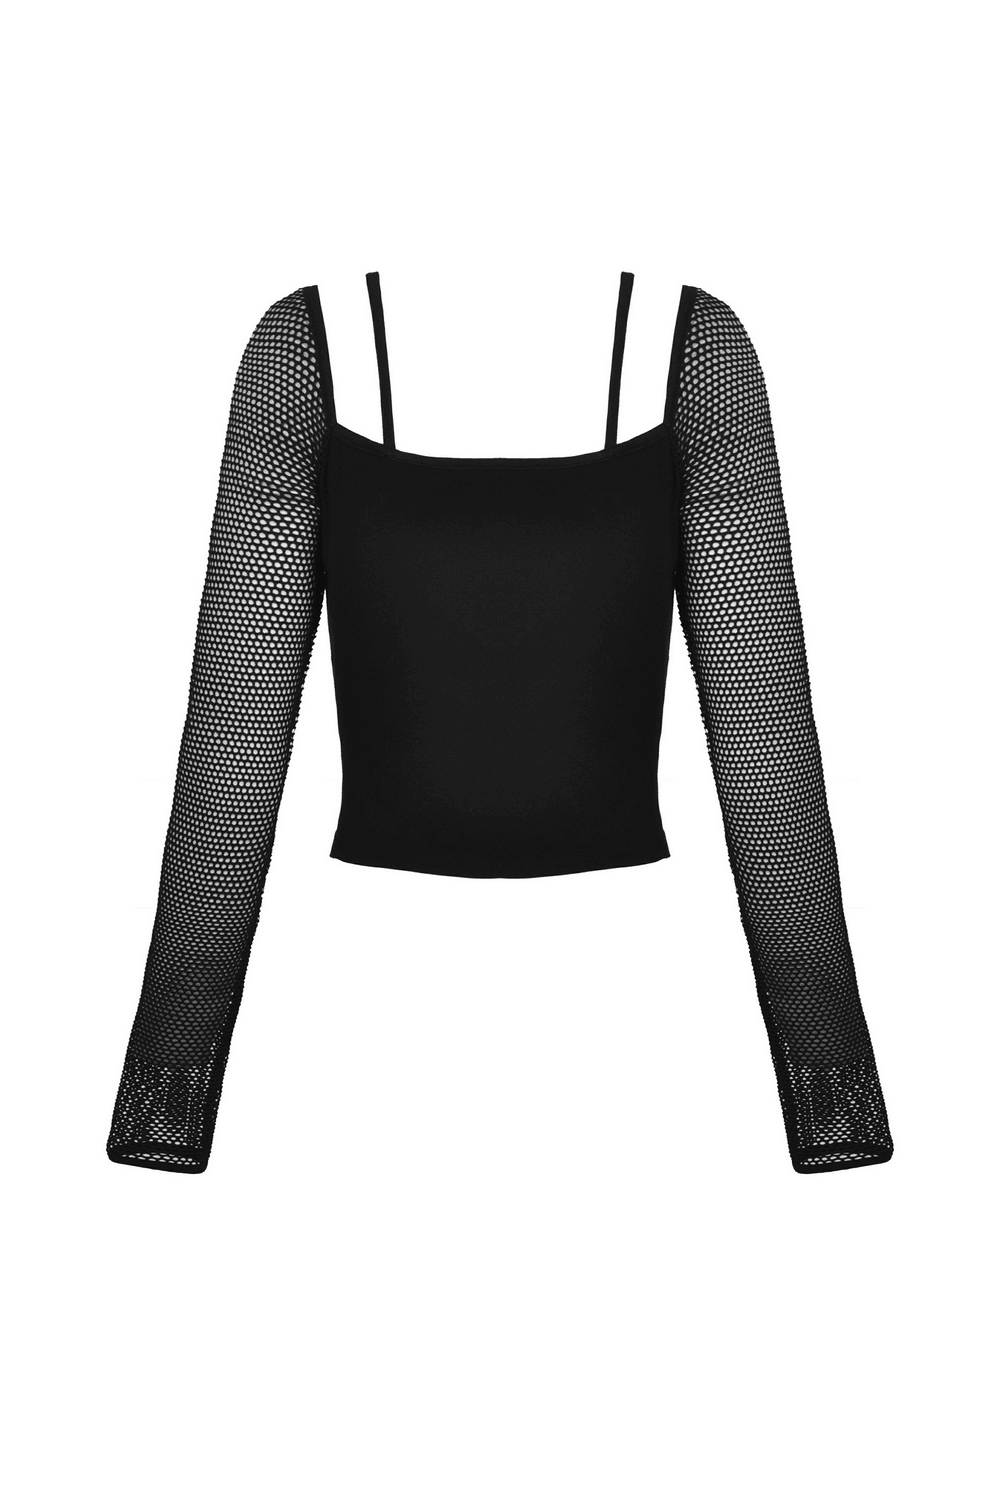 Dark Punk Gothic Net Lace Up Top with Mesh Sleeves